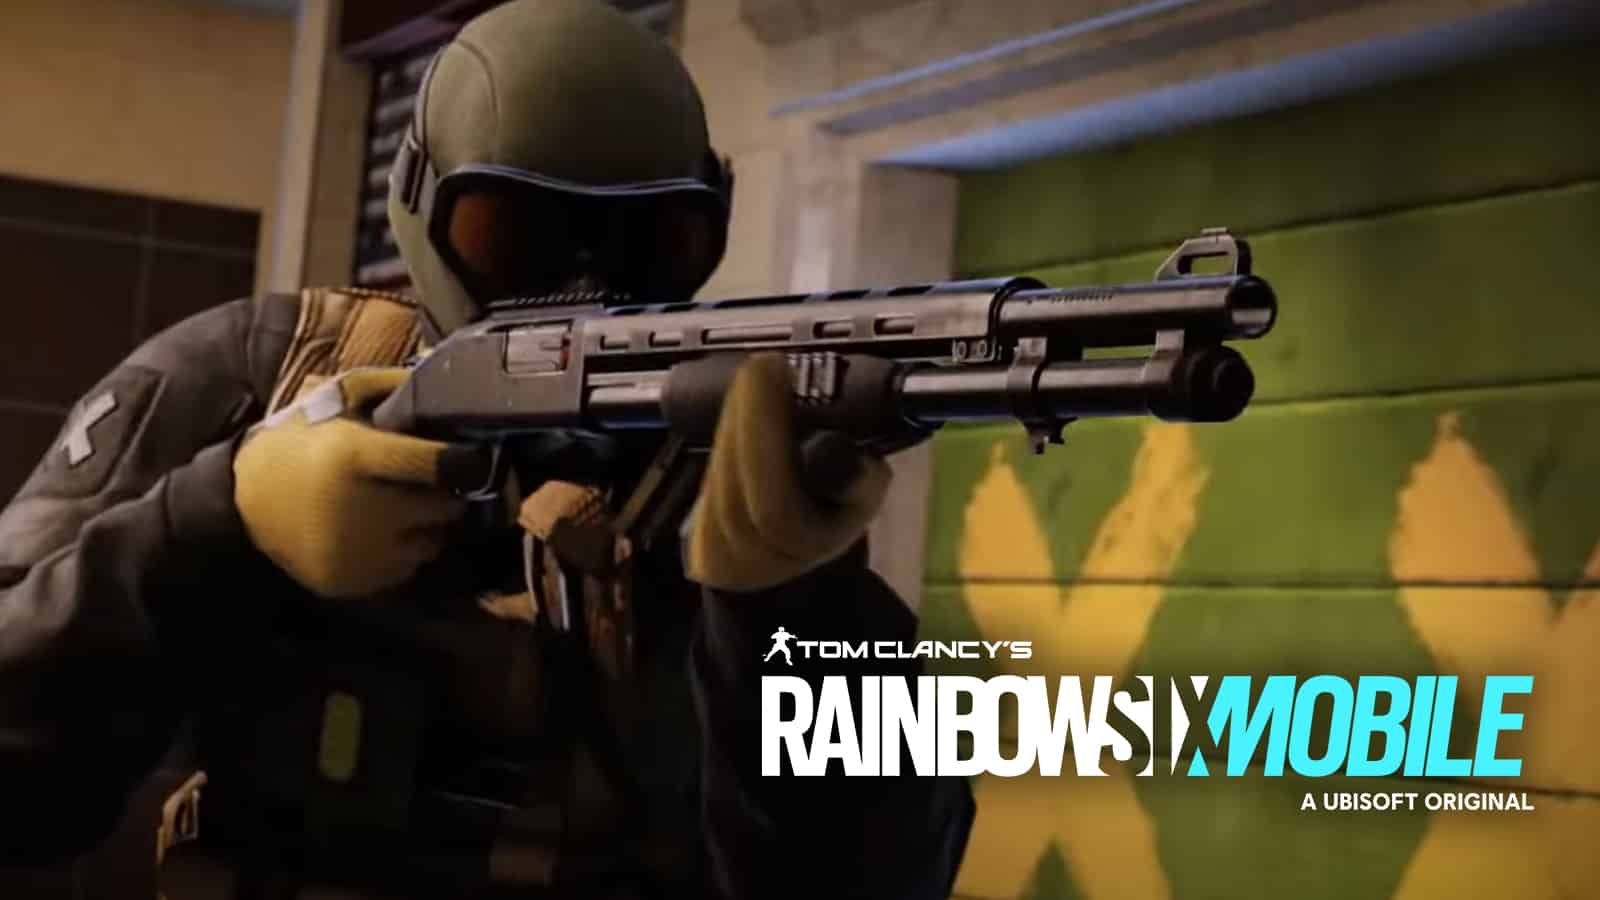 RAINBOW SIX MOBILE RELEASE DATE? (WHEN TO EXPECT IT) 